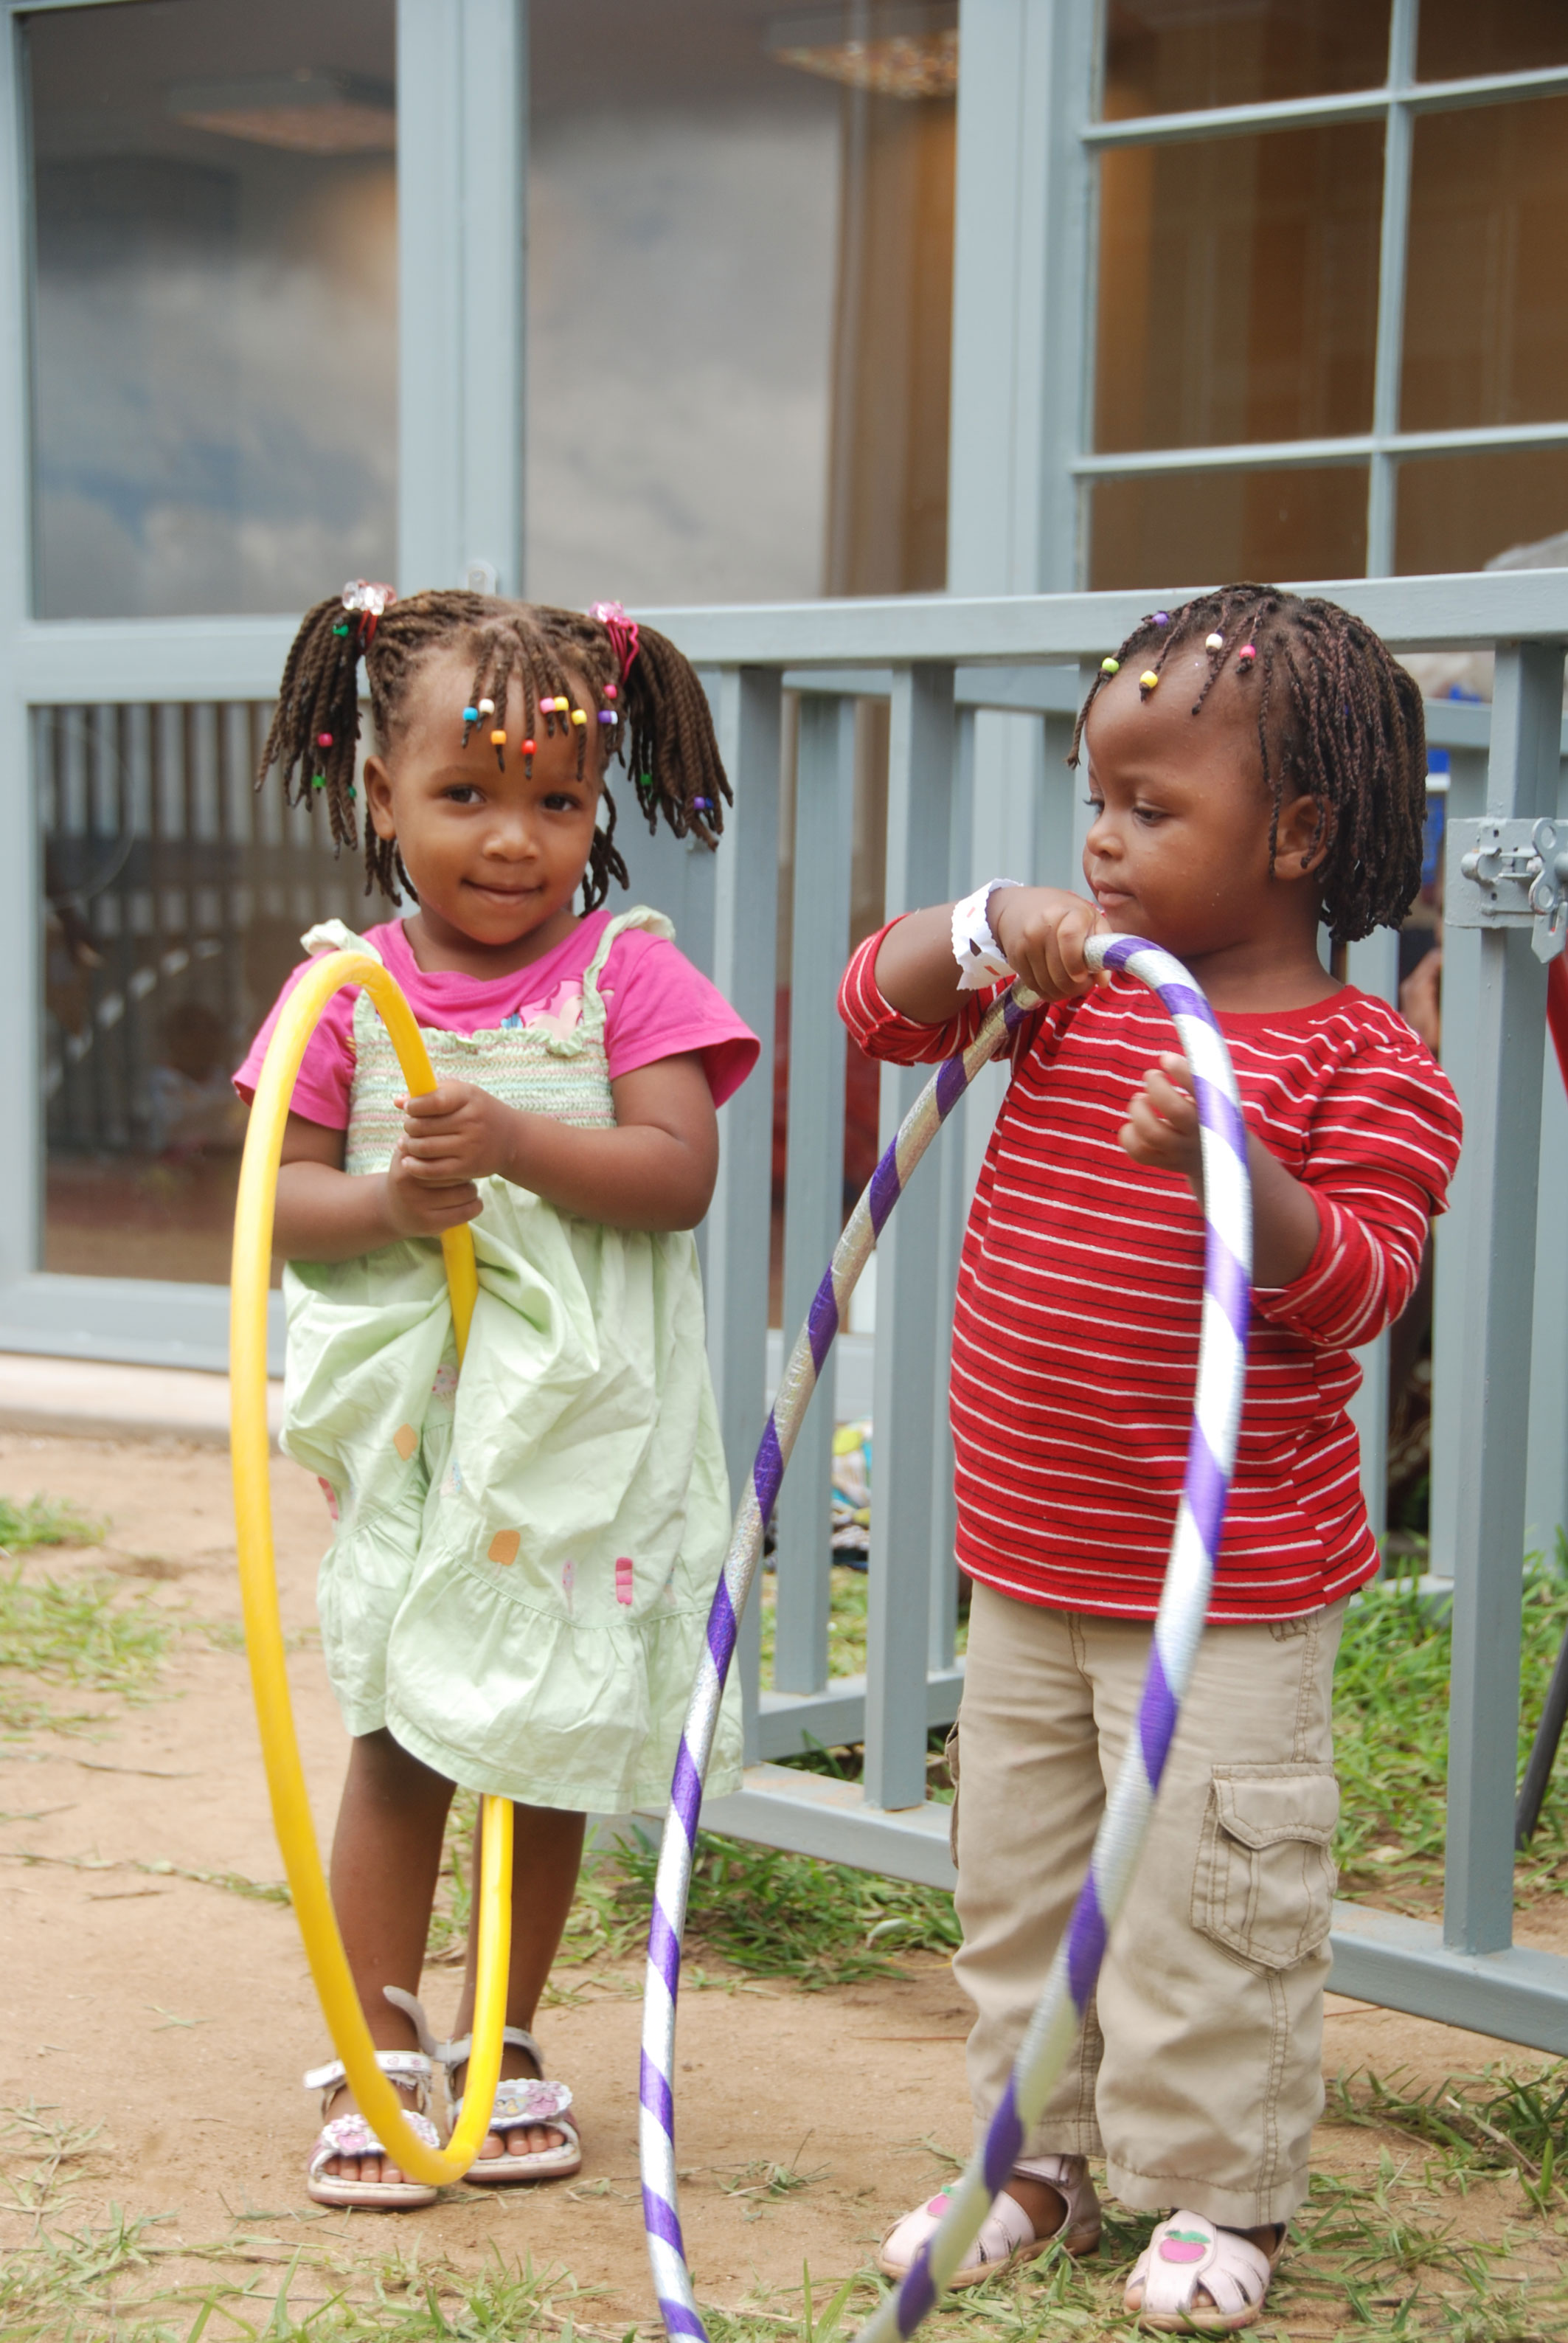 Learning through play and making good friends